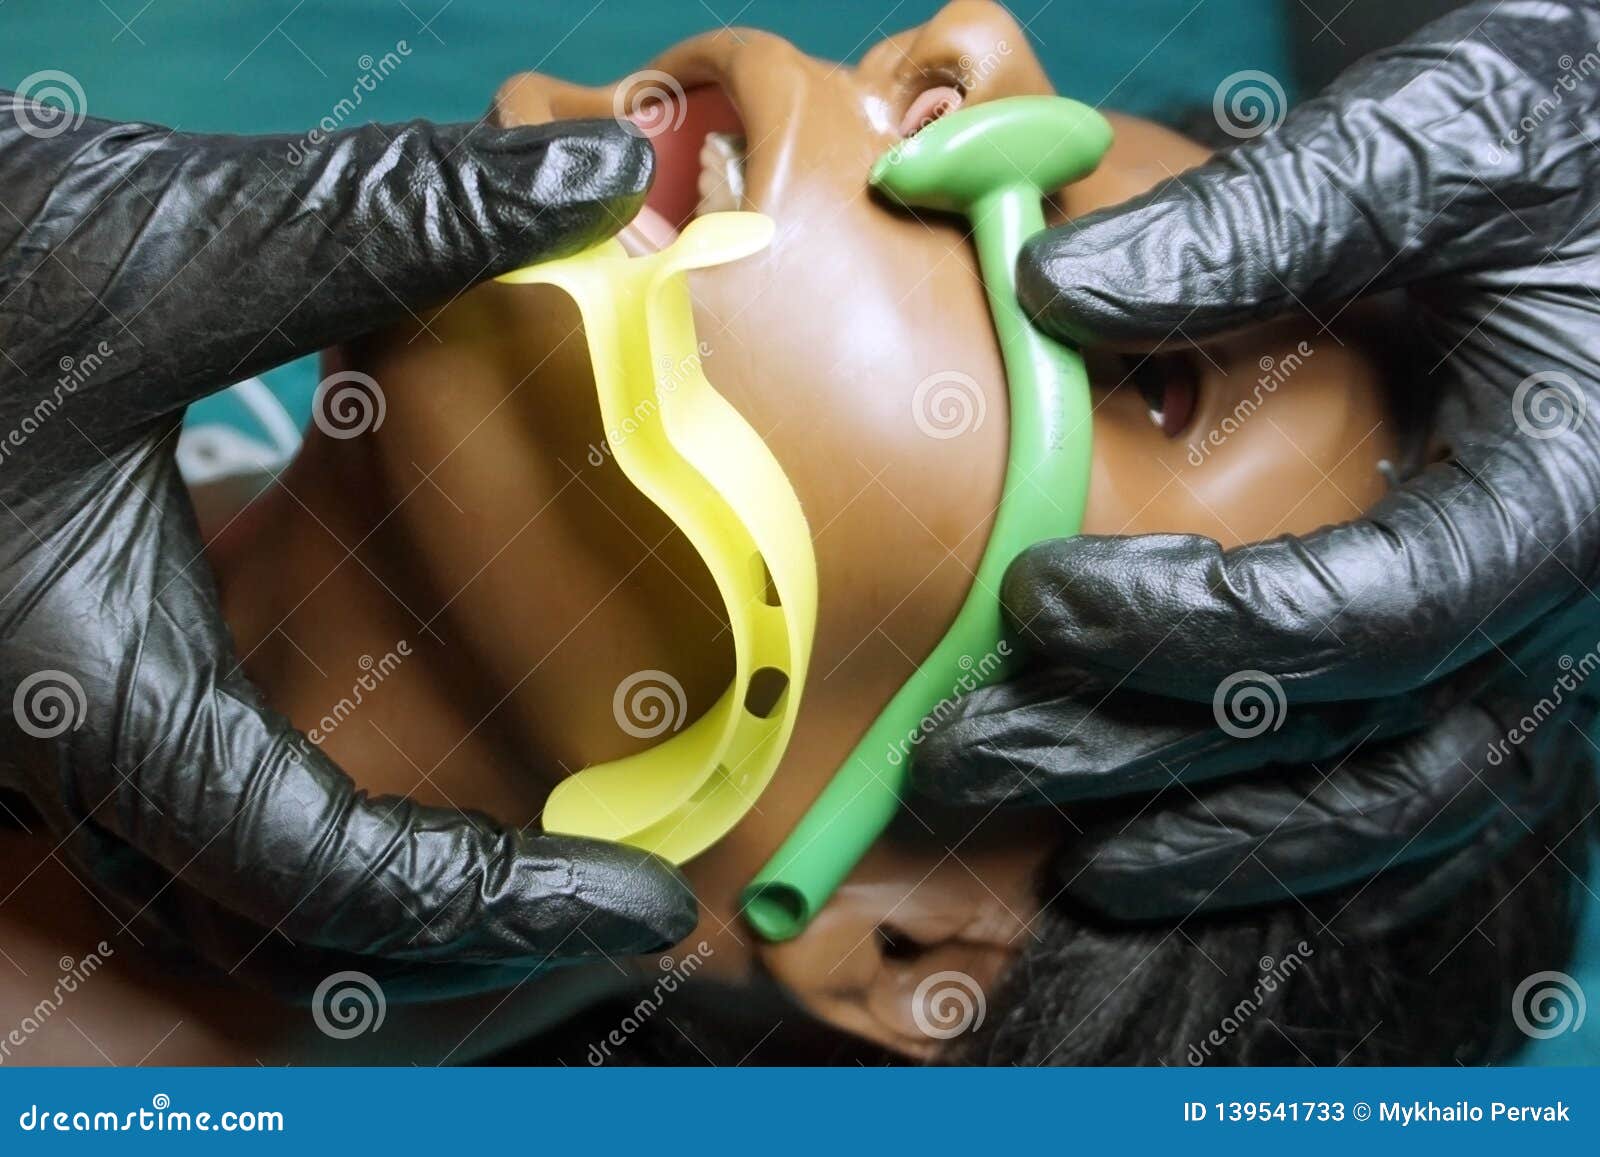 measurement of nasopharyngeal and oropharyngeal airway tubes by stuff in a black gloves on a simulation mannequin dummy during